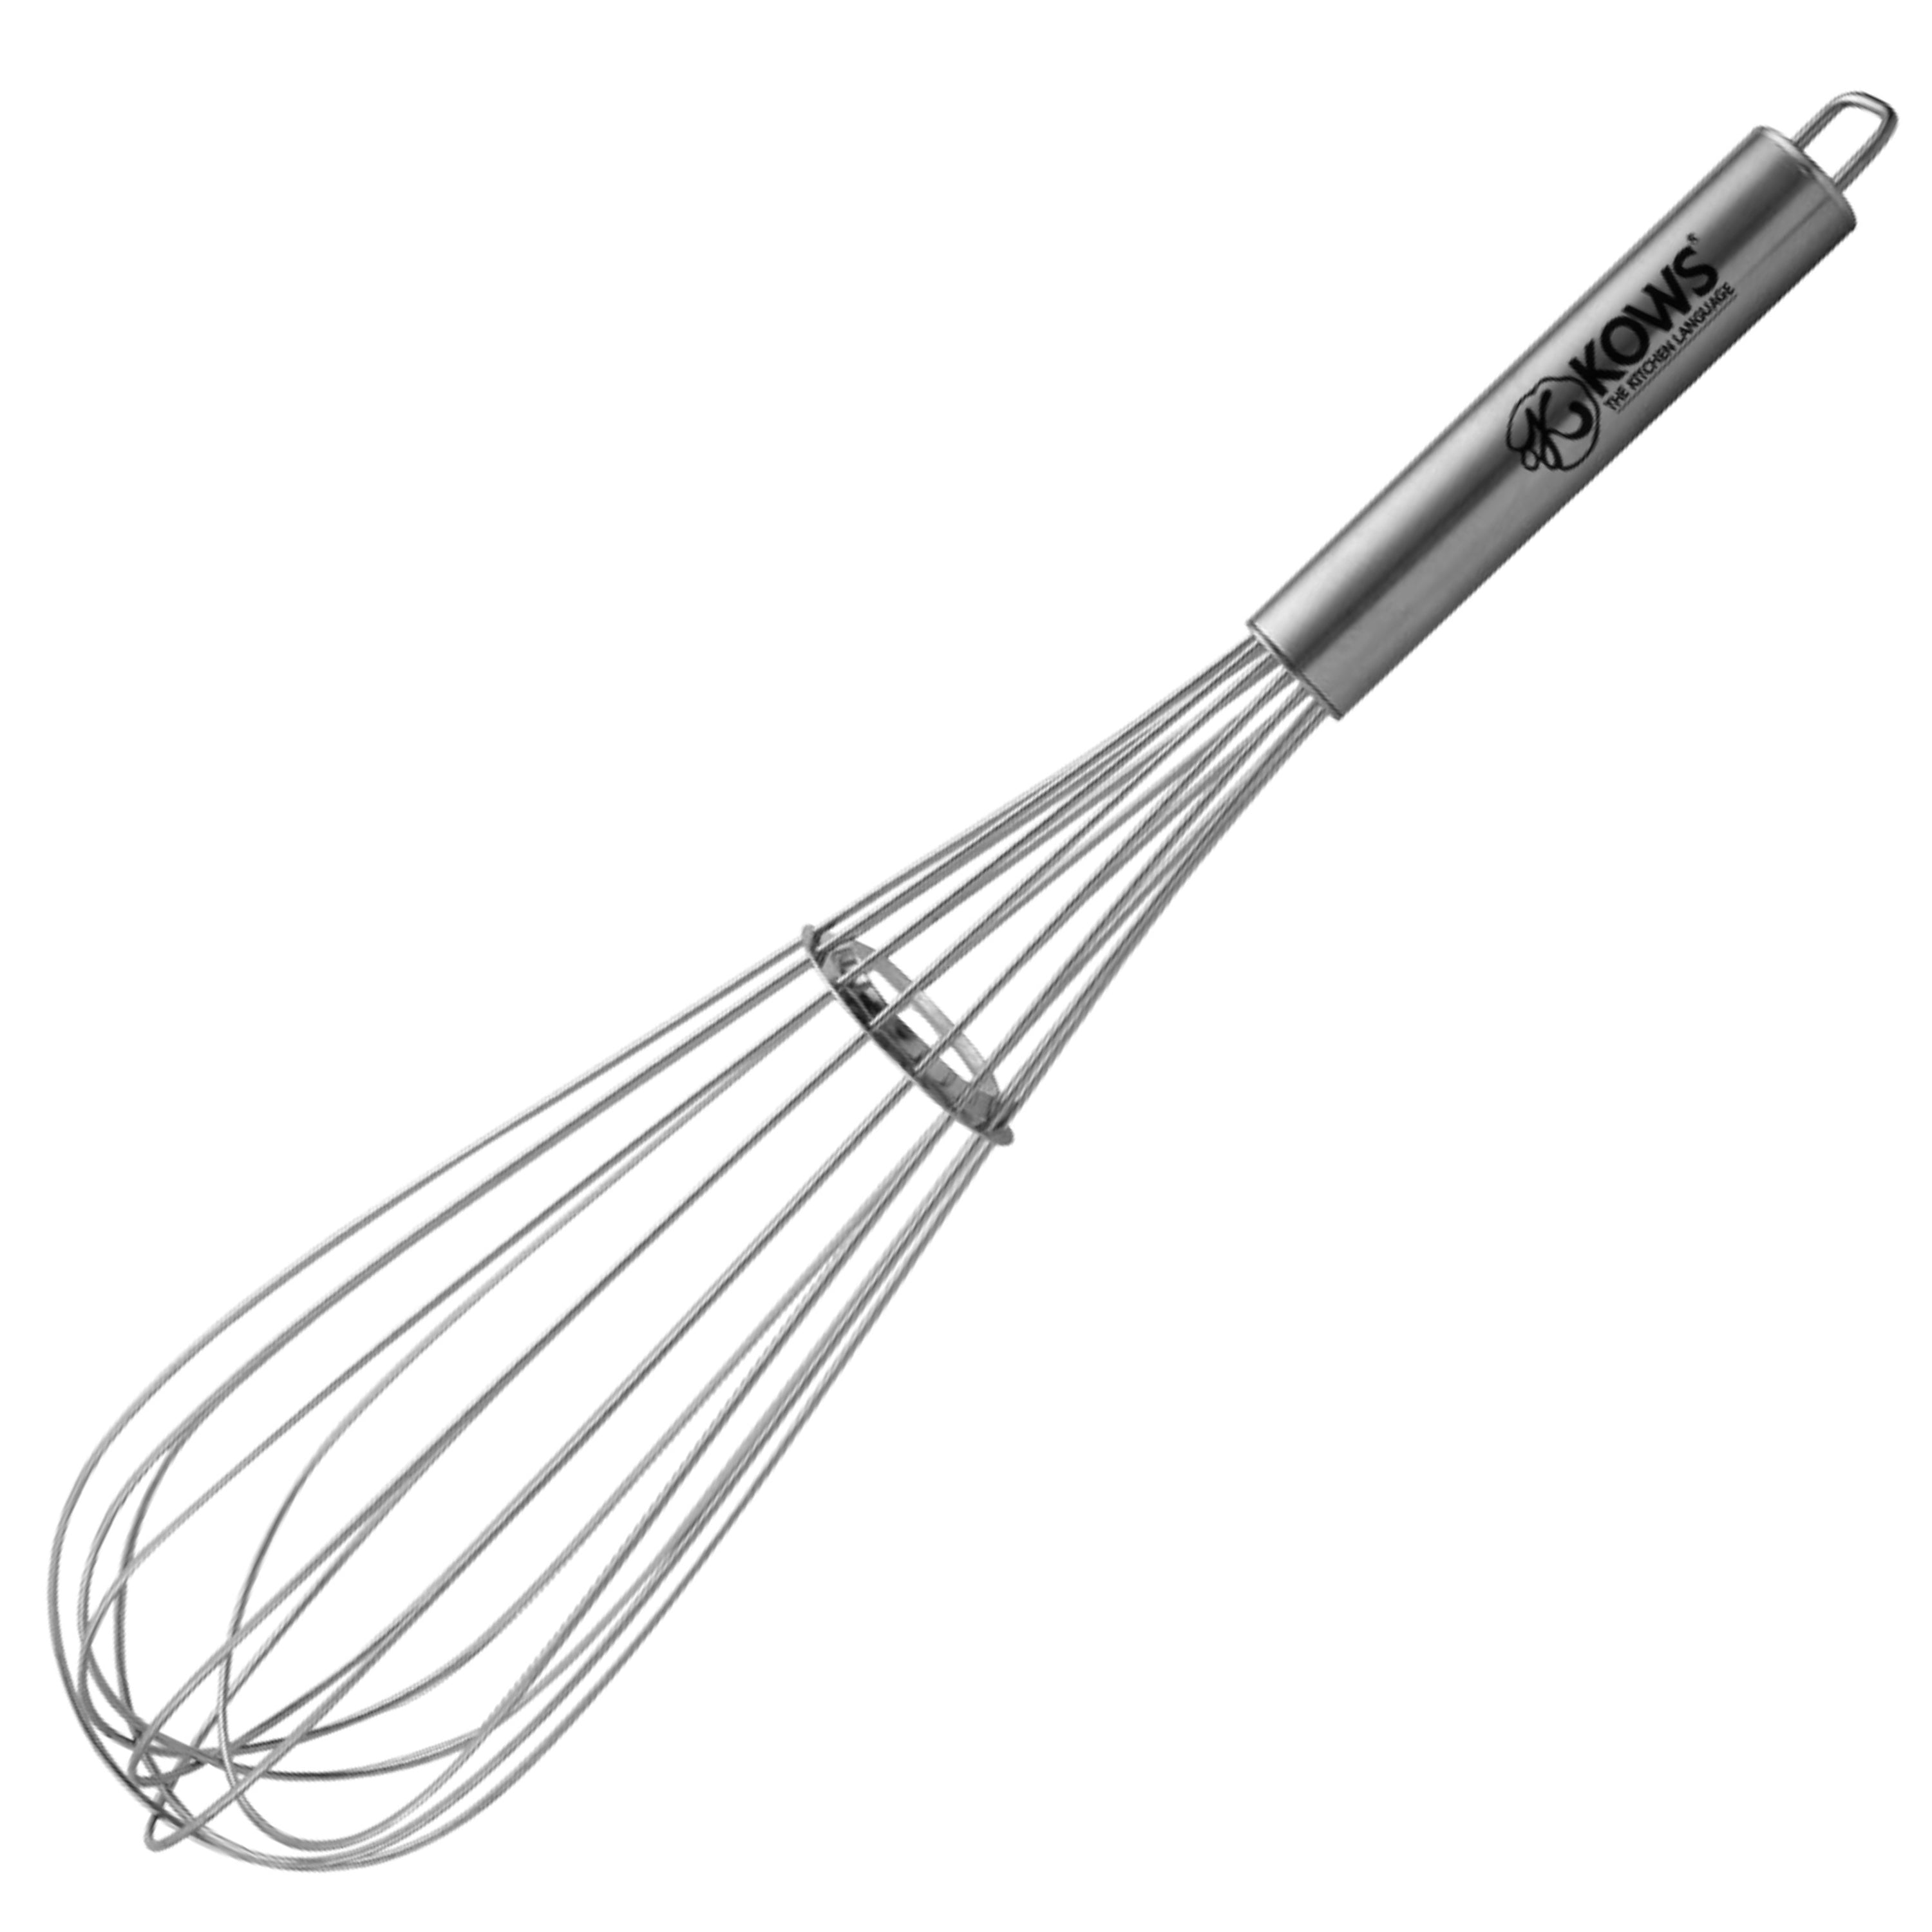 KOWS Pipe handle 1.4mm whisk 25 cm (WK009)